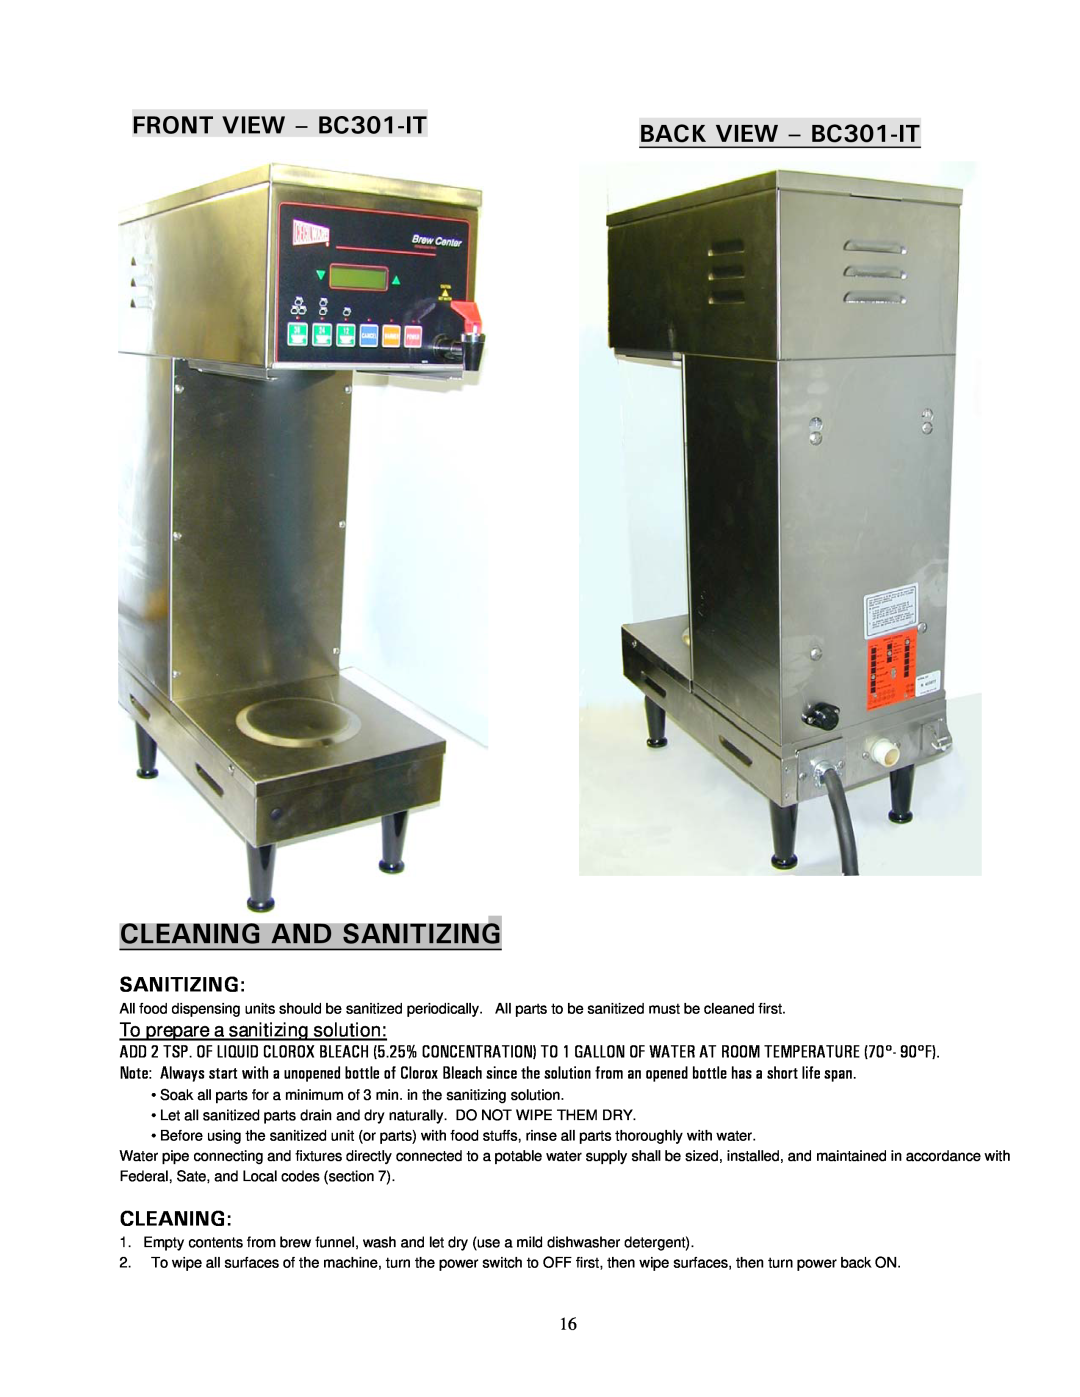 Cecilware BC2-IT FRONT VIEW - BC301-IT, BACK VIEW - BC301-IT, Sanitizing, To prepare a sanitizing solution, Cleaning 